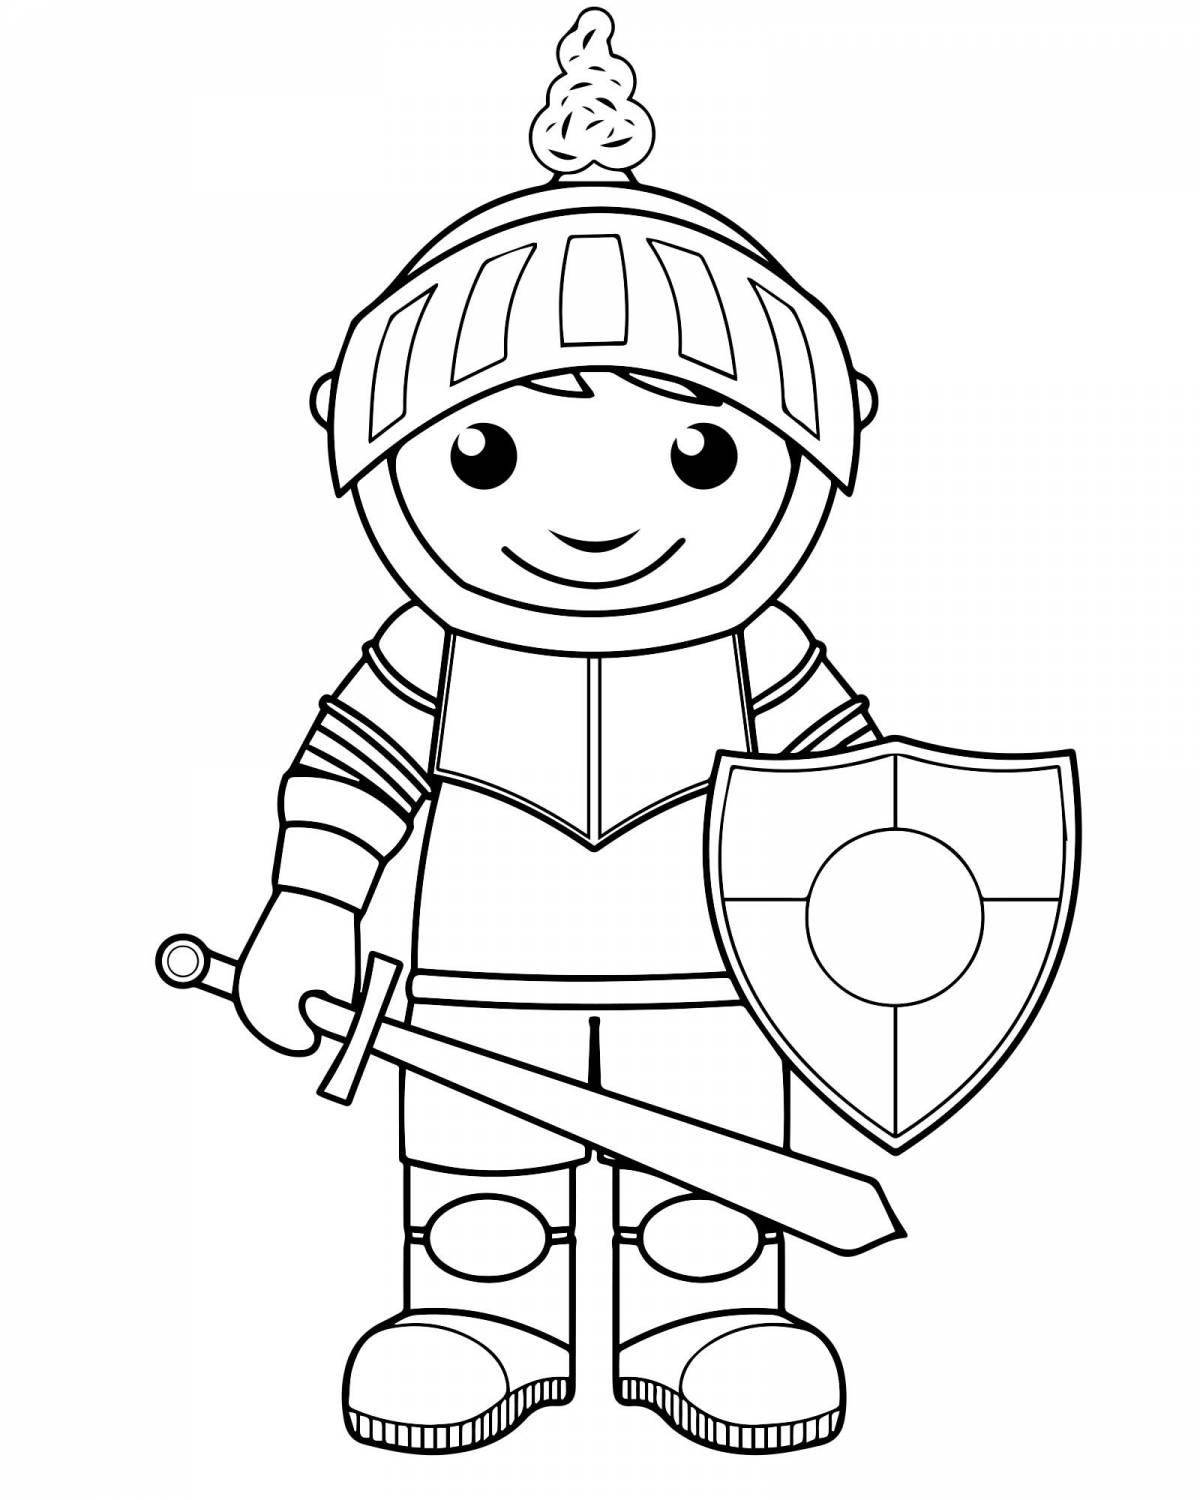 Fearless knight coloring book